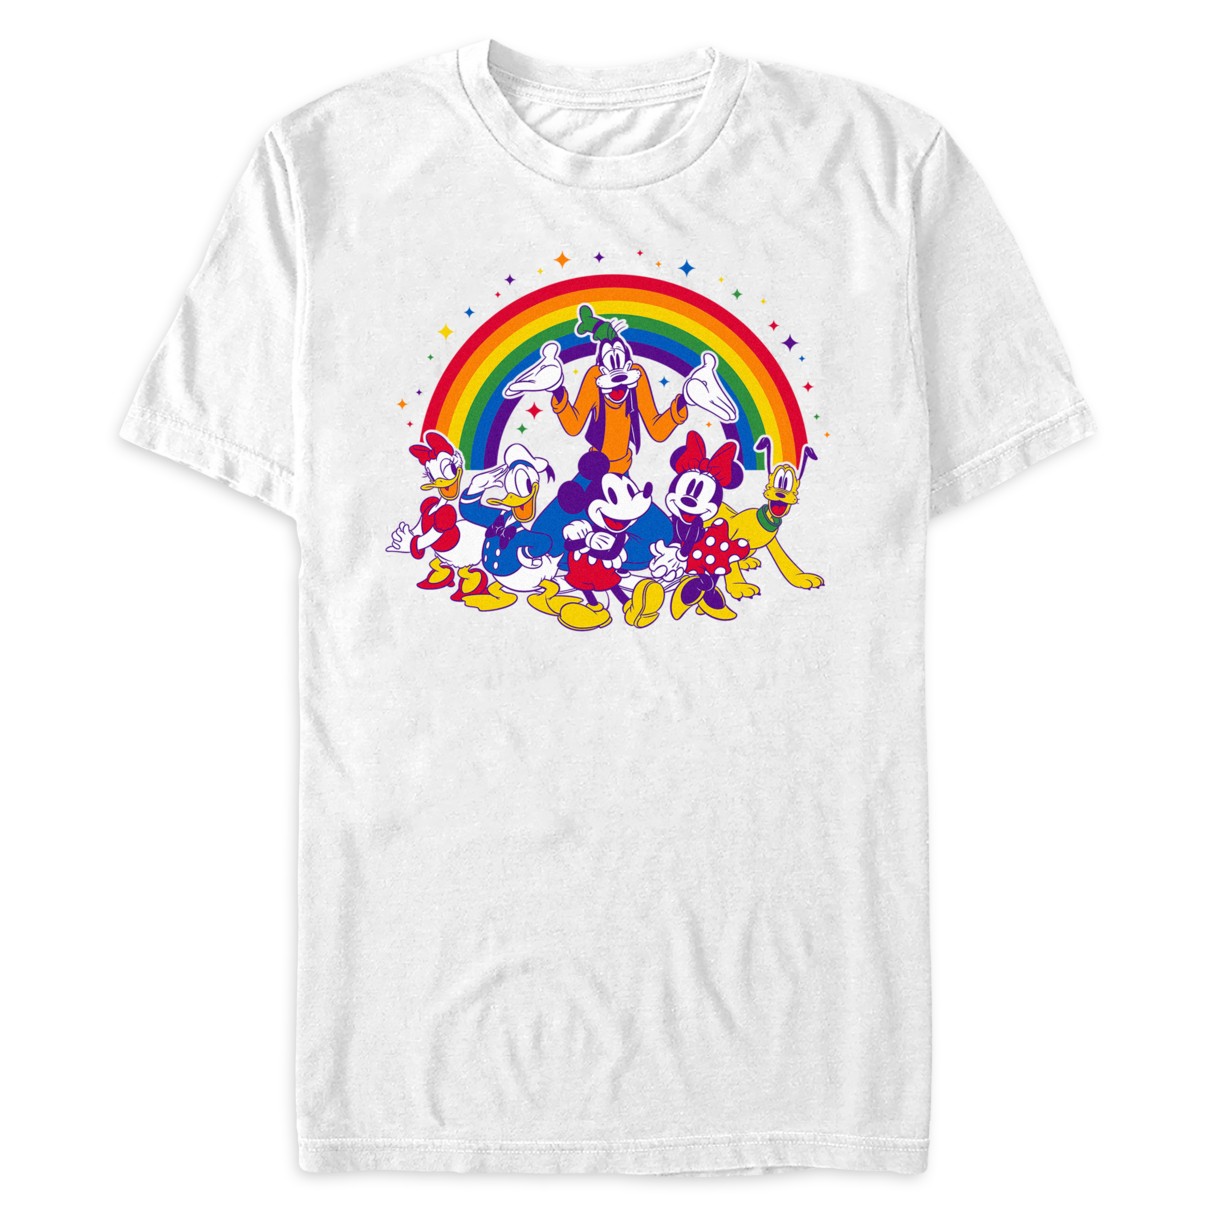 Mickey Mouse and Friends Rainbow T-Shirt for Adults – Disney Pride Collection